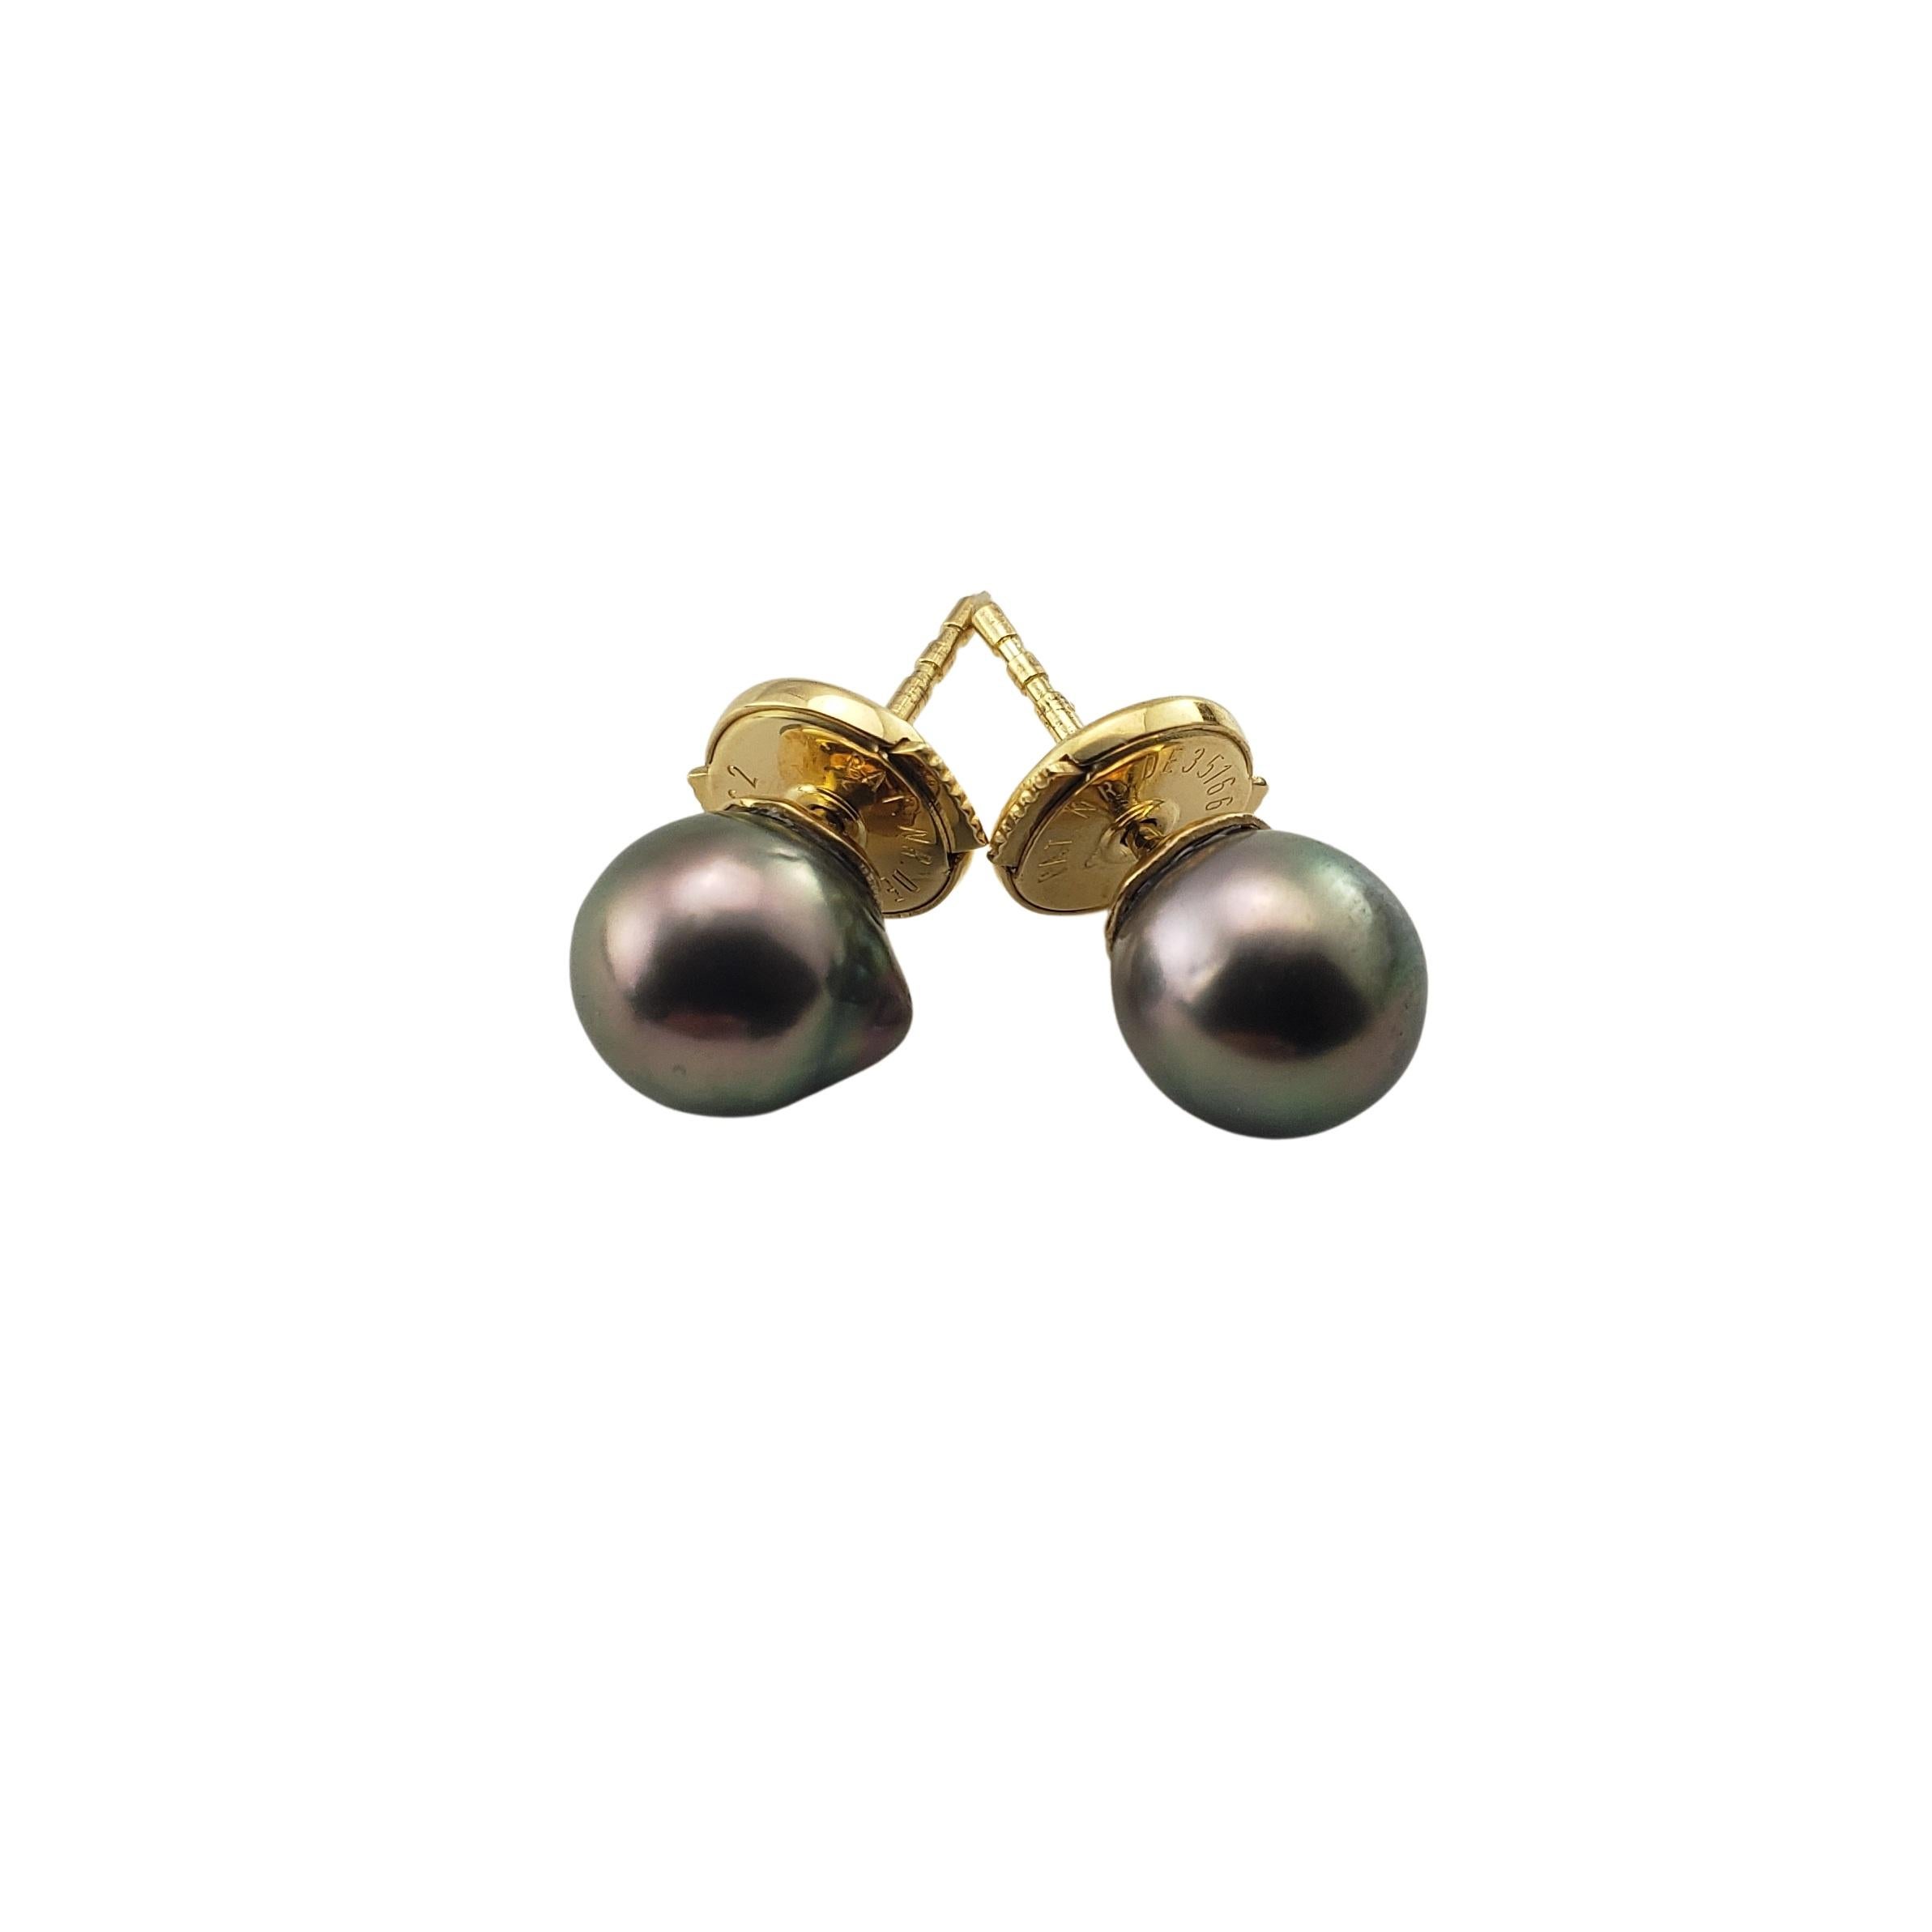 18 Karat Yellow Gold Baroque Black Pearl Stud Earrings-

These elegant stud earrings each feature one  black baroque pearl (8 mm) set in classic 18K yellow gold.  Push back closures.

Size:  8 mm

Weight:  2.0 dwt. /  3.2 gr.

Stamped:  750  PAT  NR